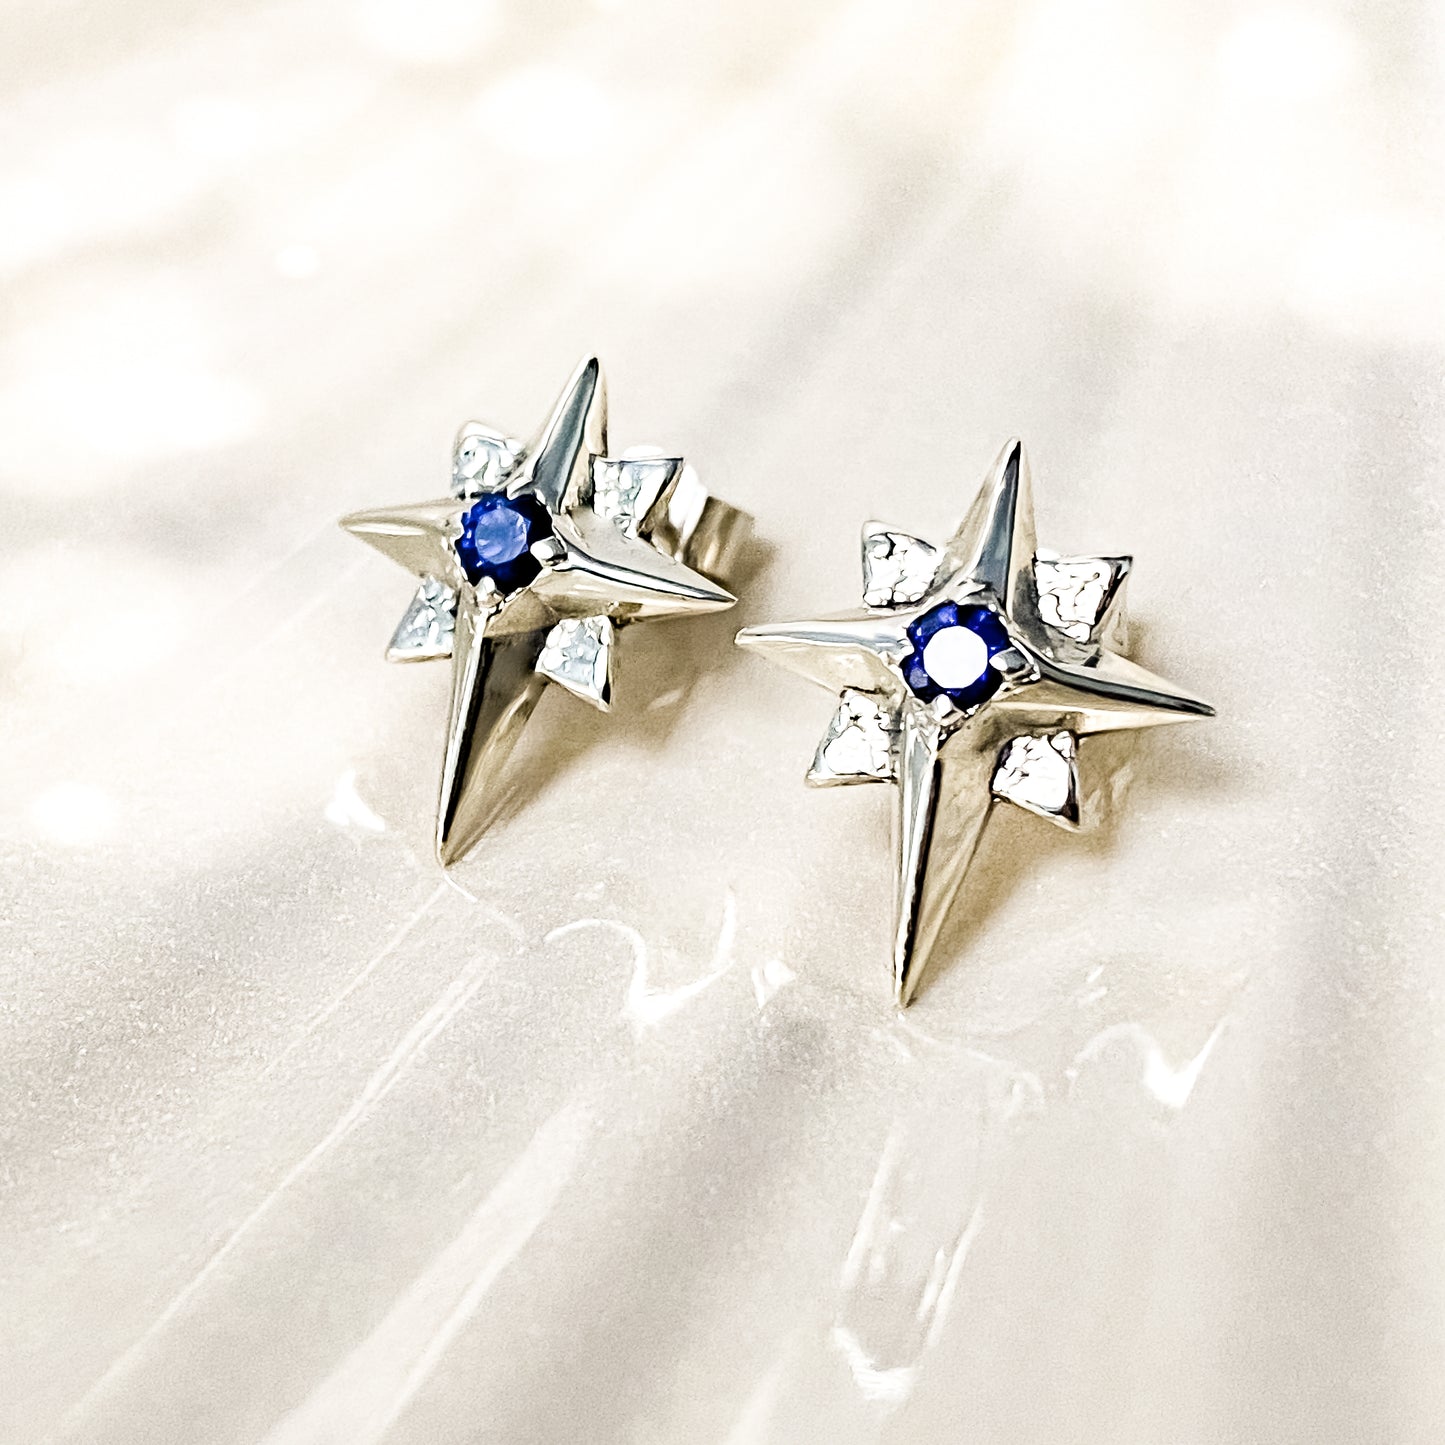 North Star White Gold Large Stud Earrings with Sapphire